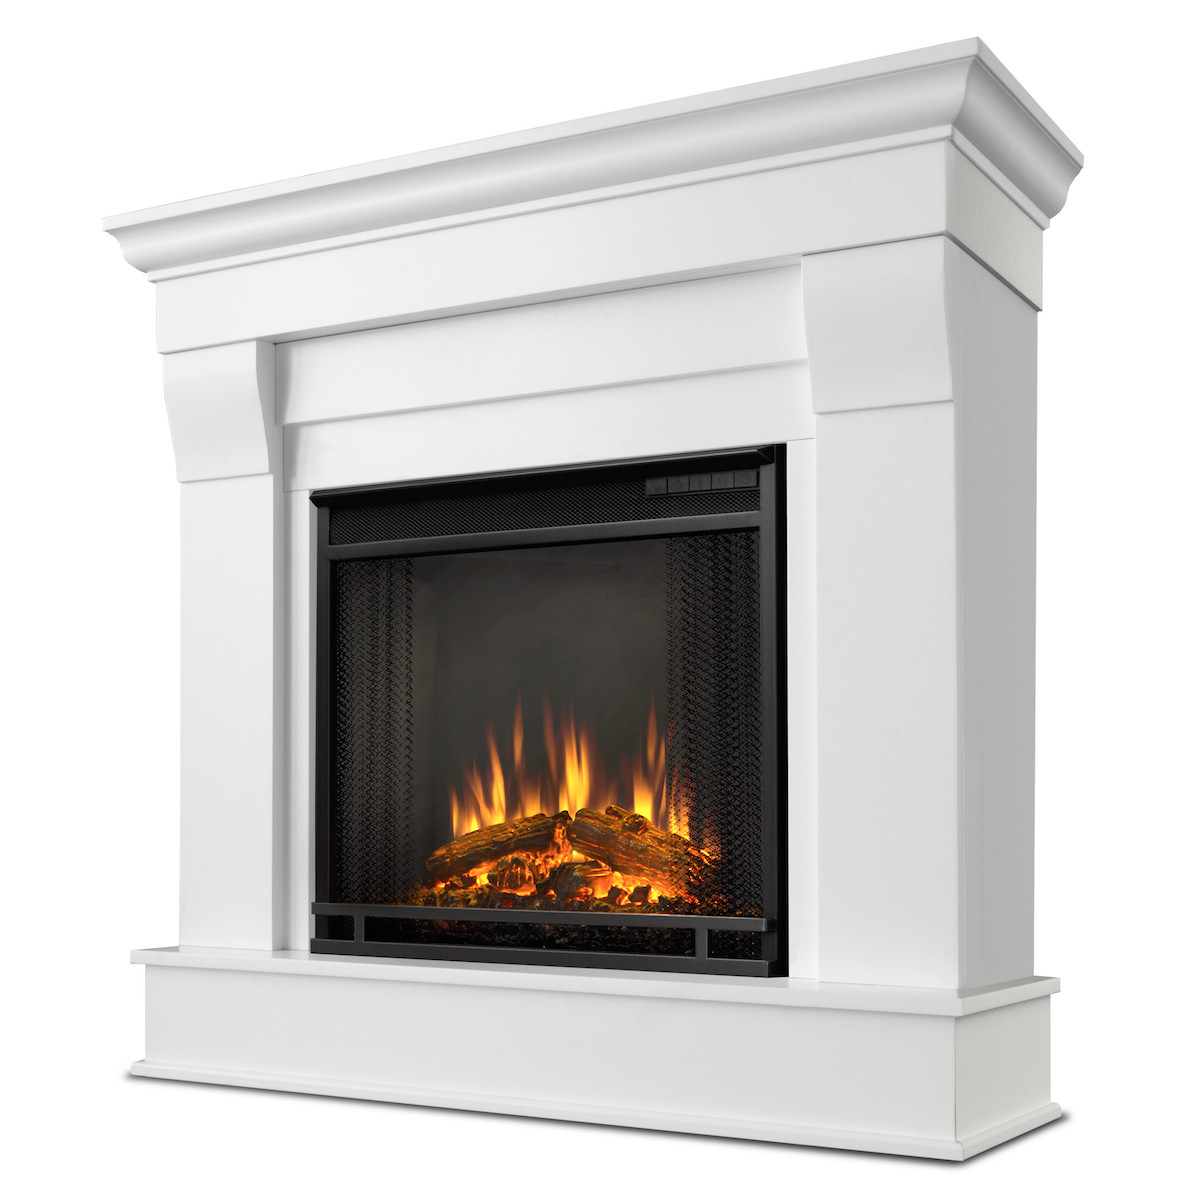 Real Flame White Electric Fireplace
 Real Flame Chateau Electric Fireplace in White